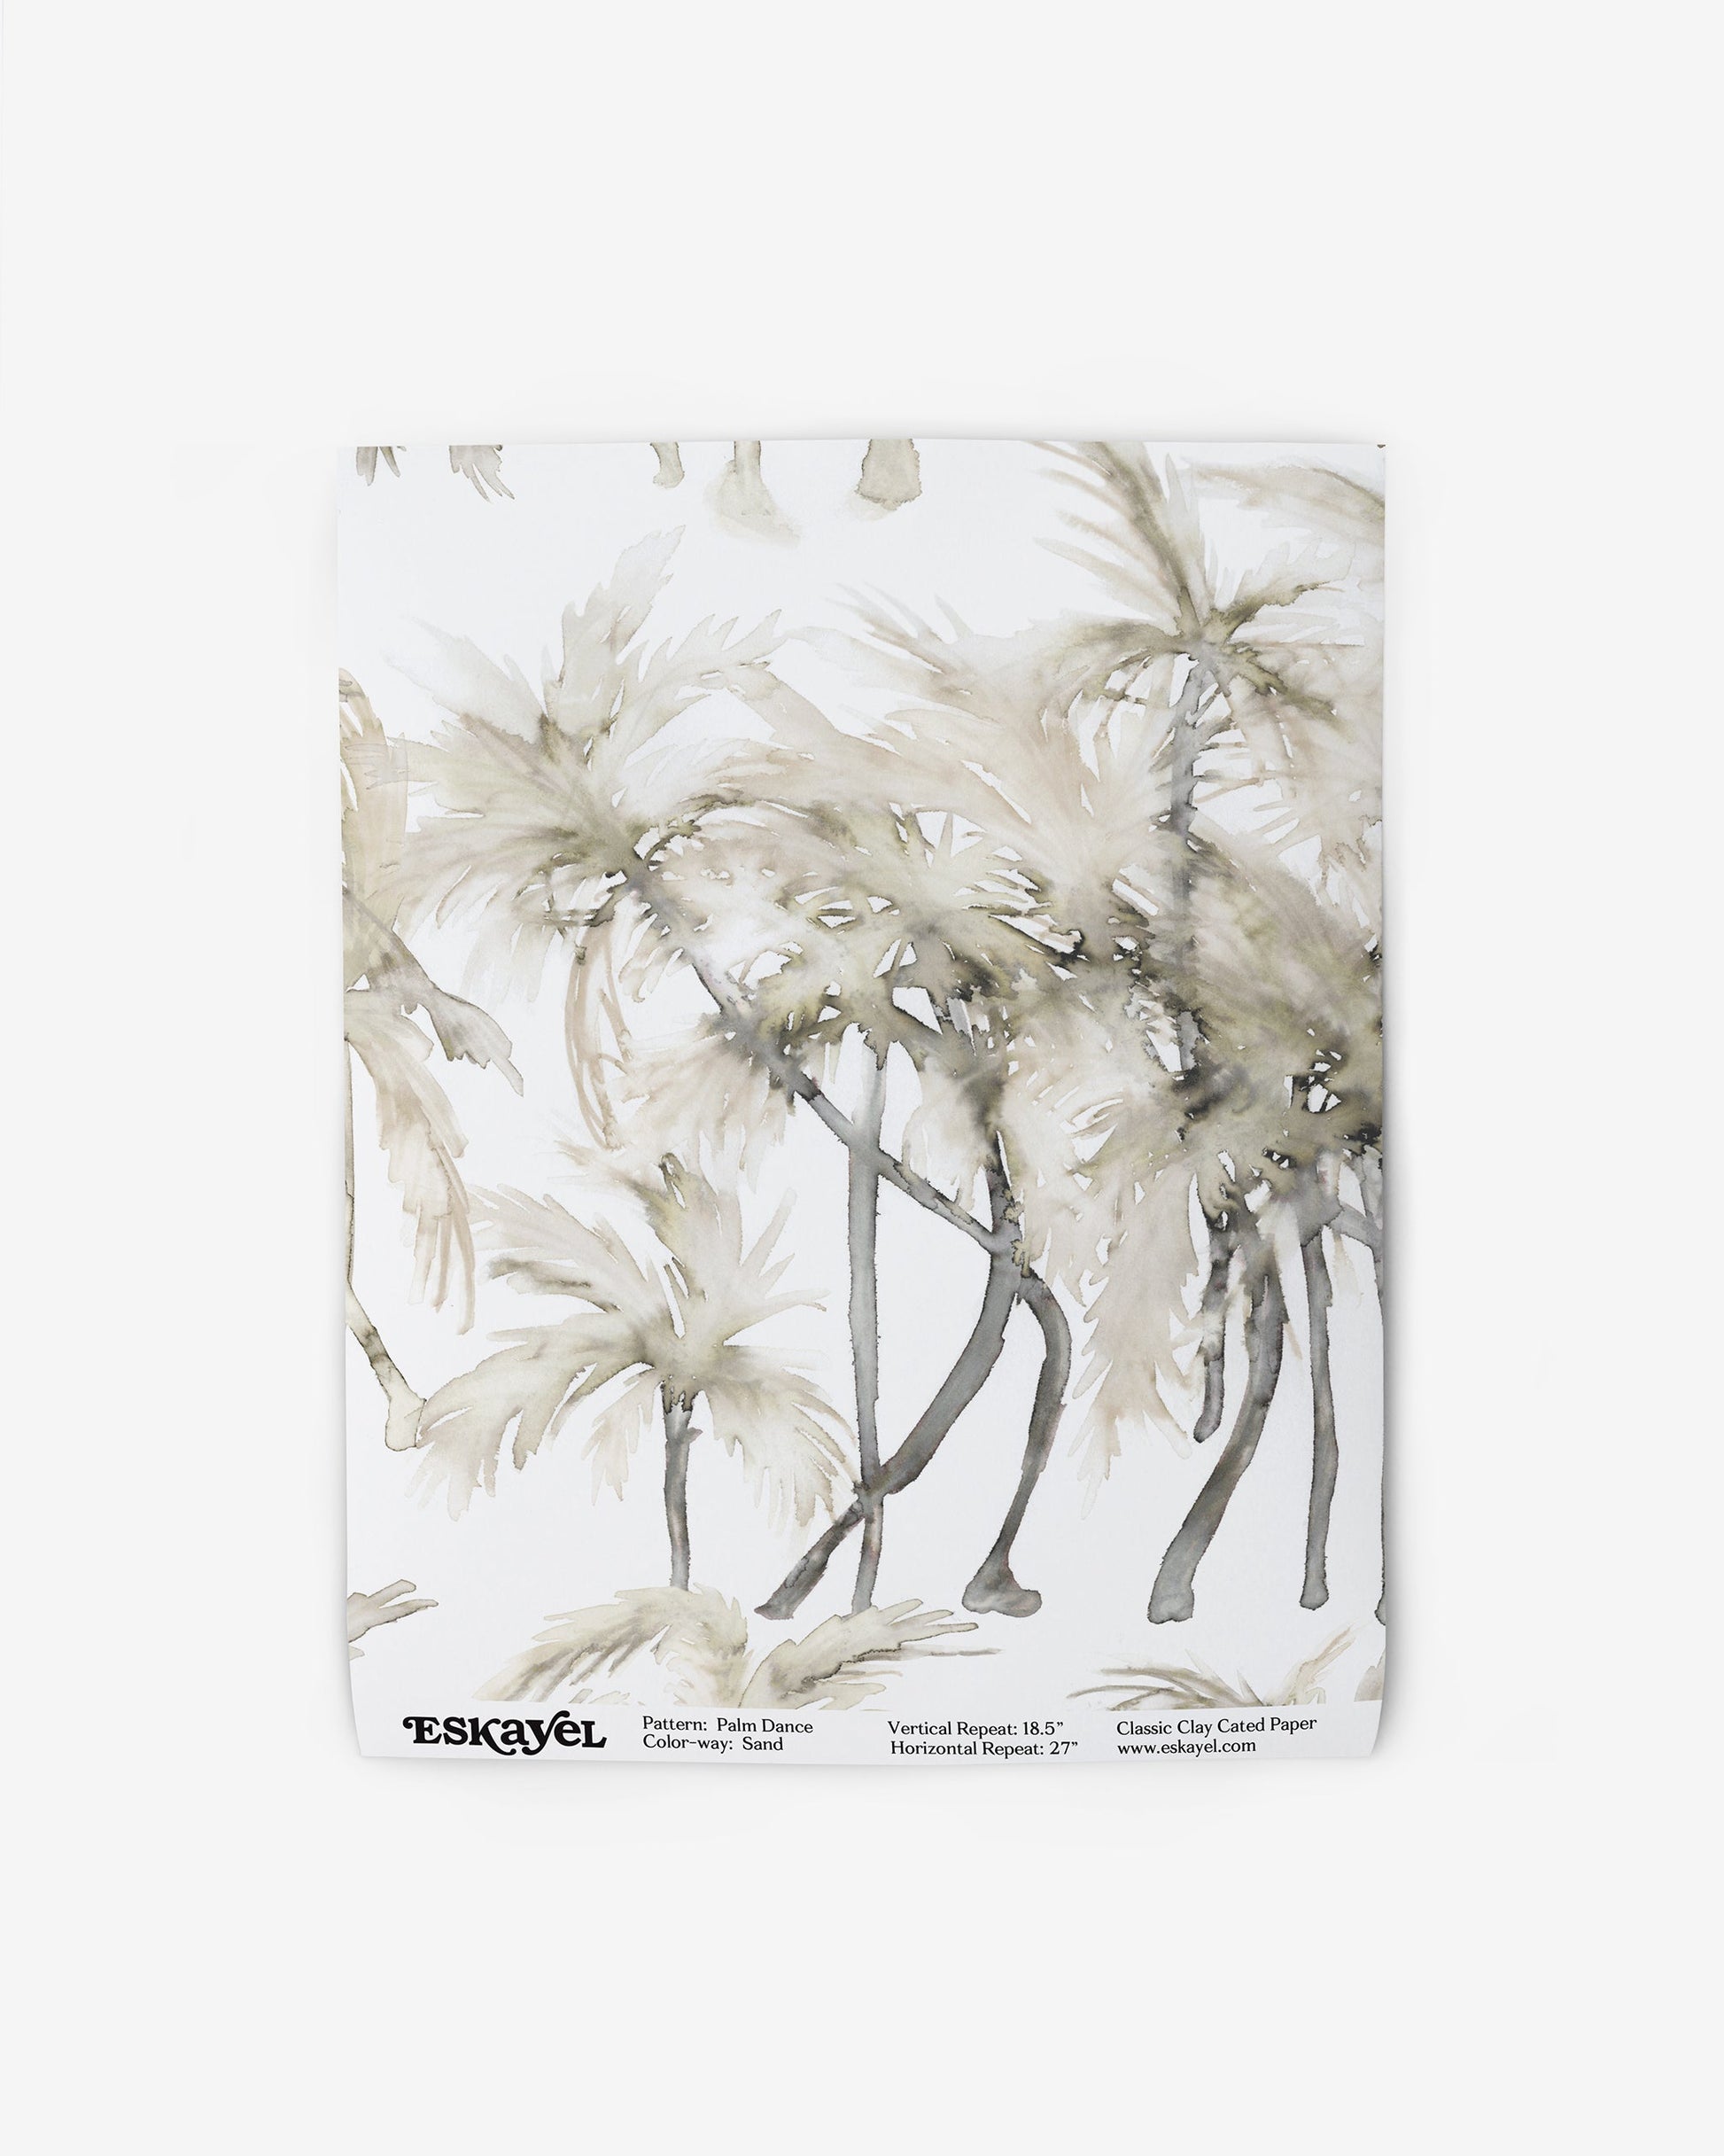 A luxury Palm Dance Wallpaper Sand, featuring palm trees, from Costa Rica's Playa Hermosa